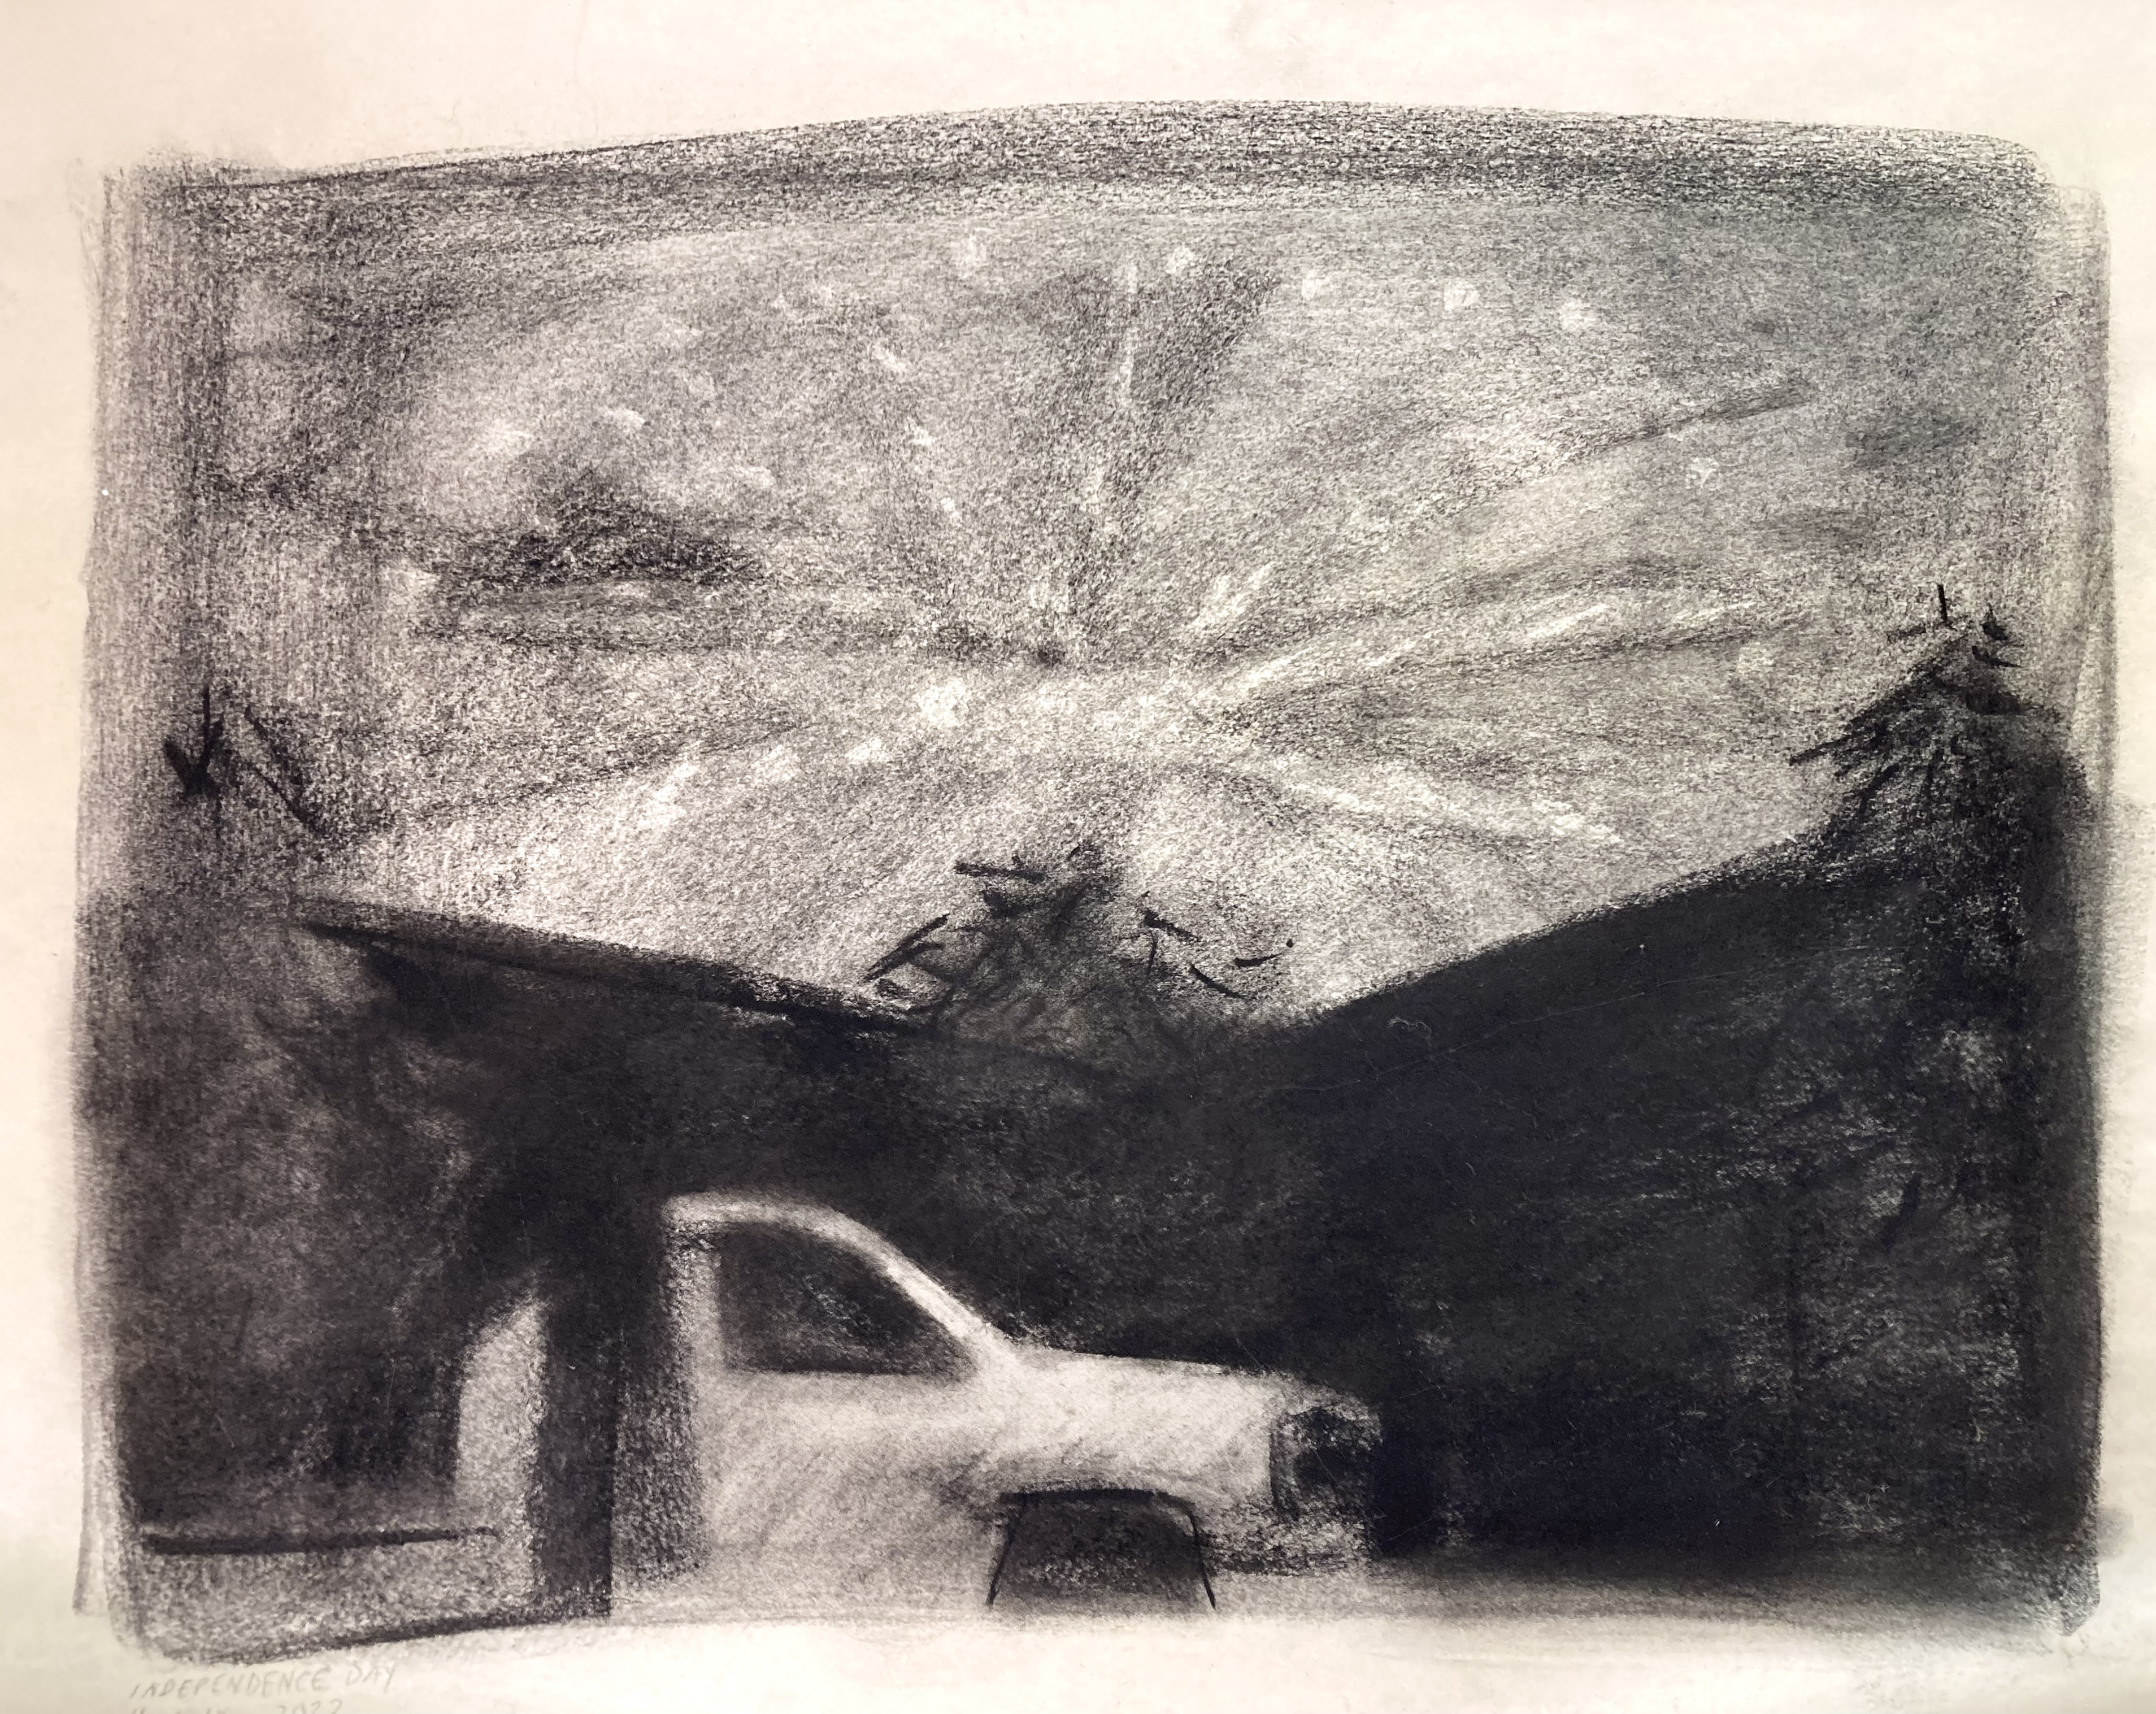 Firework Over Landscaping Truck (2023). Compressed charcoal on newsprint.